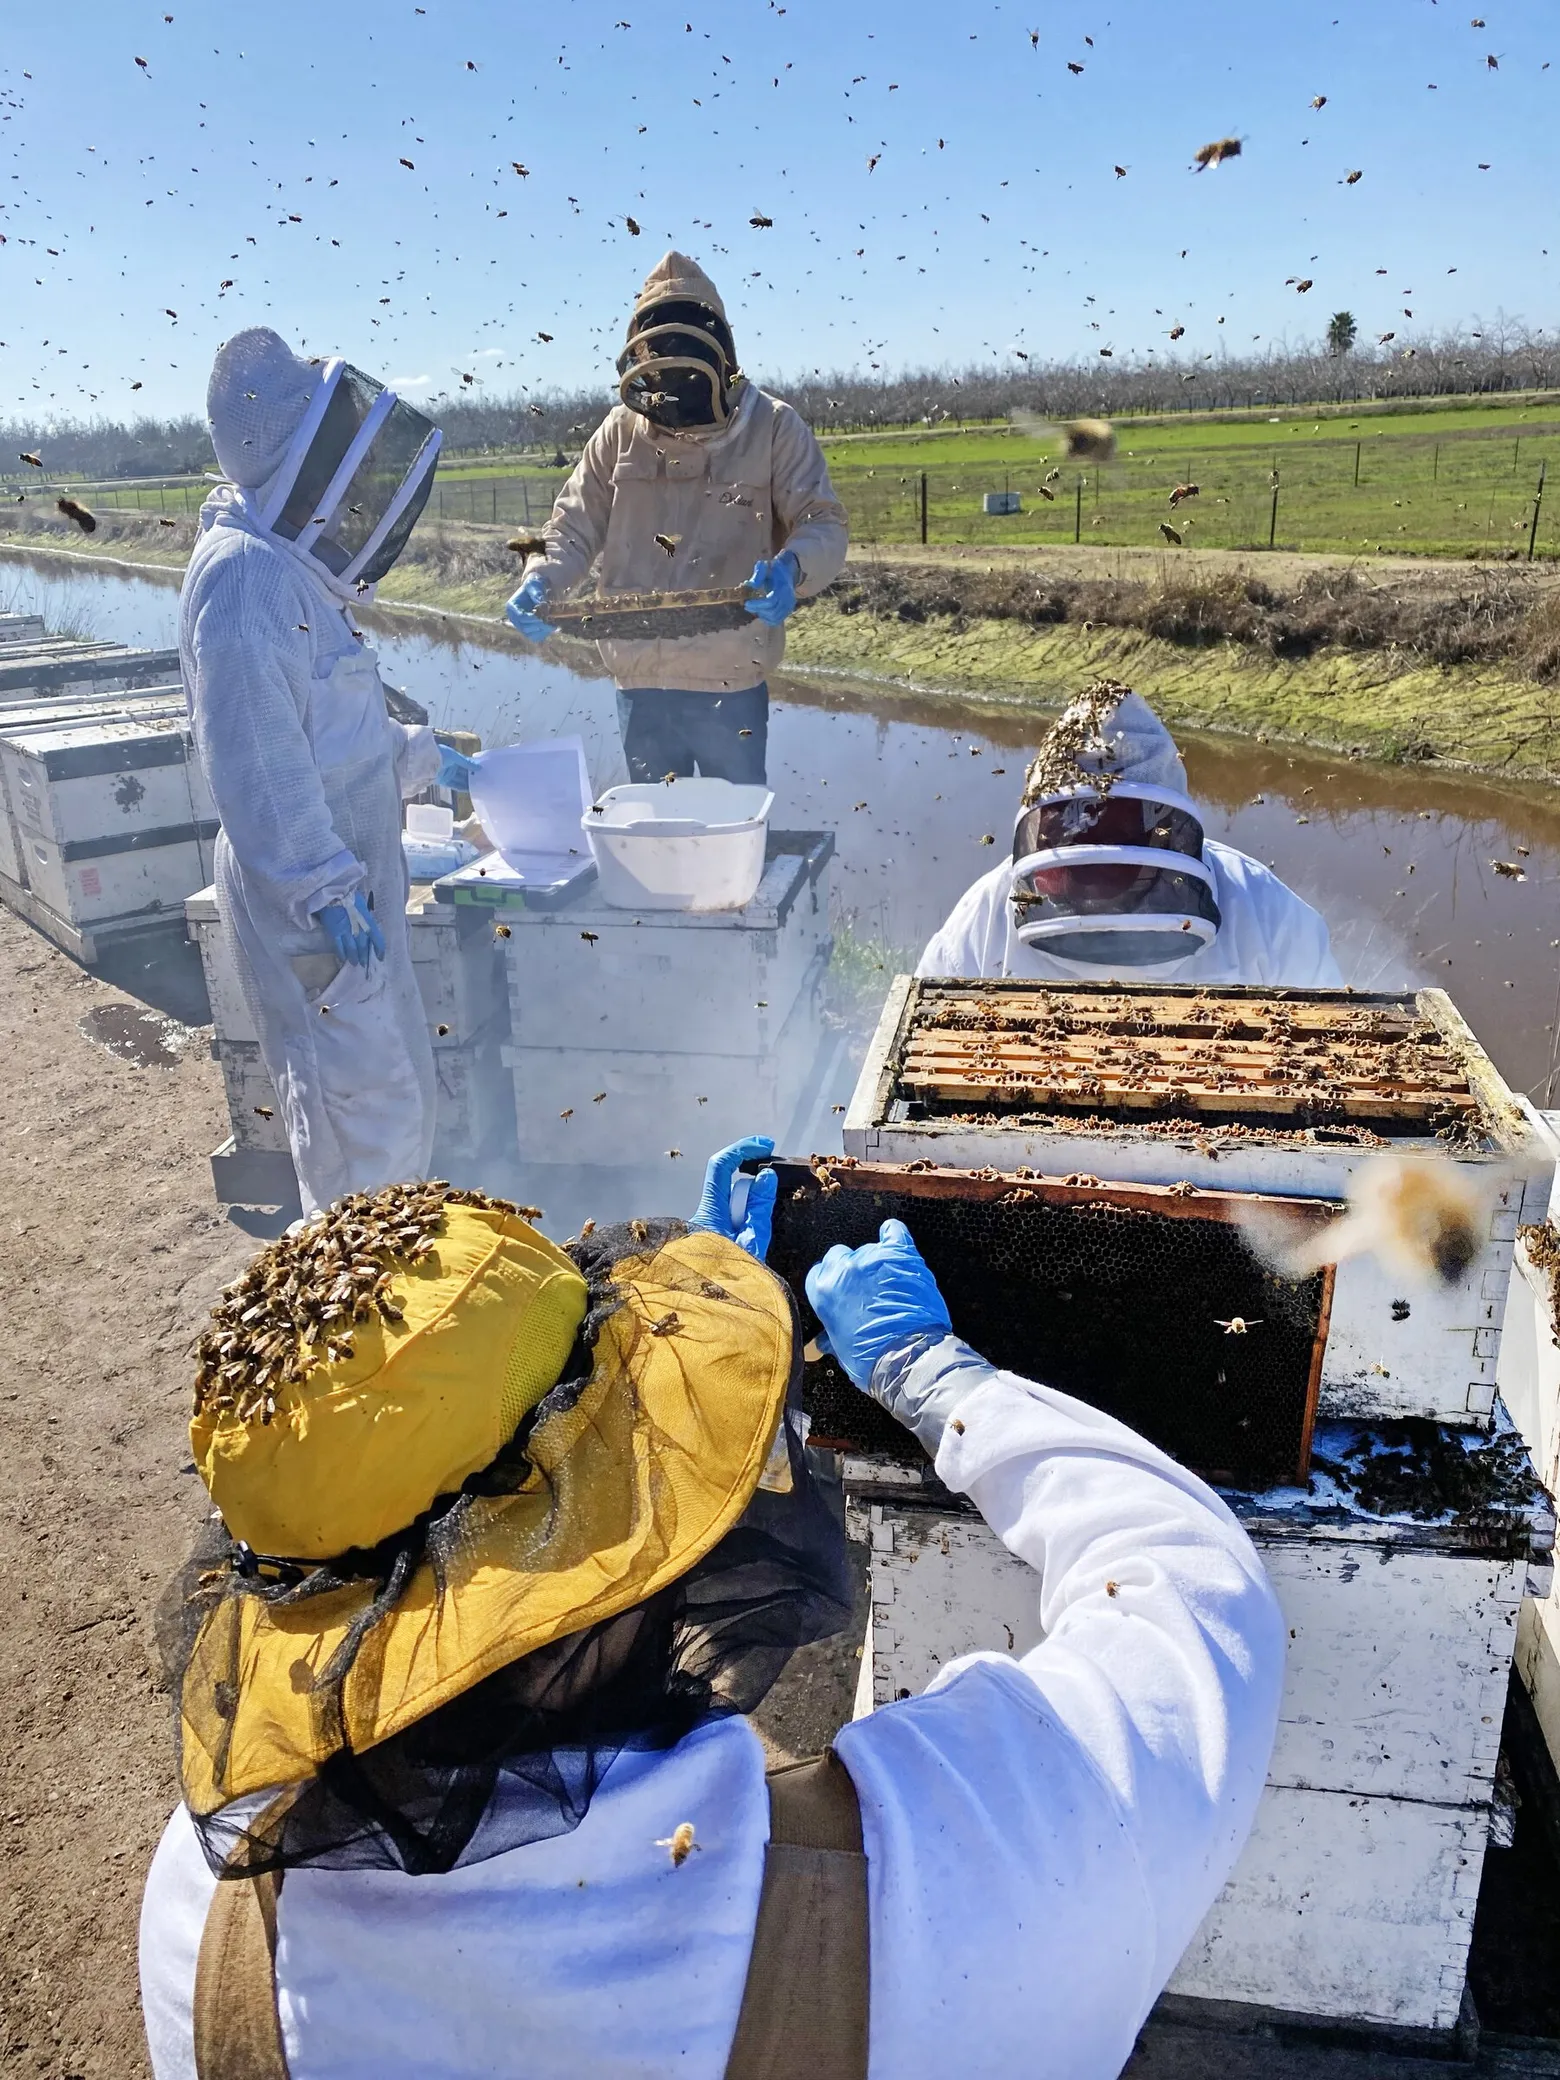 Washington State University researchers and students collect samples and perform honey bee colony health assessments in orchards near Modesto, California. A study done in conjunction with the U.S. Department of Agriculture found bee colonies are at risk of collapse because of climate change. Photo: Brandon Hopkins / Washington State University